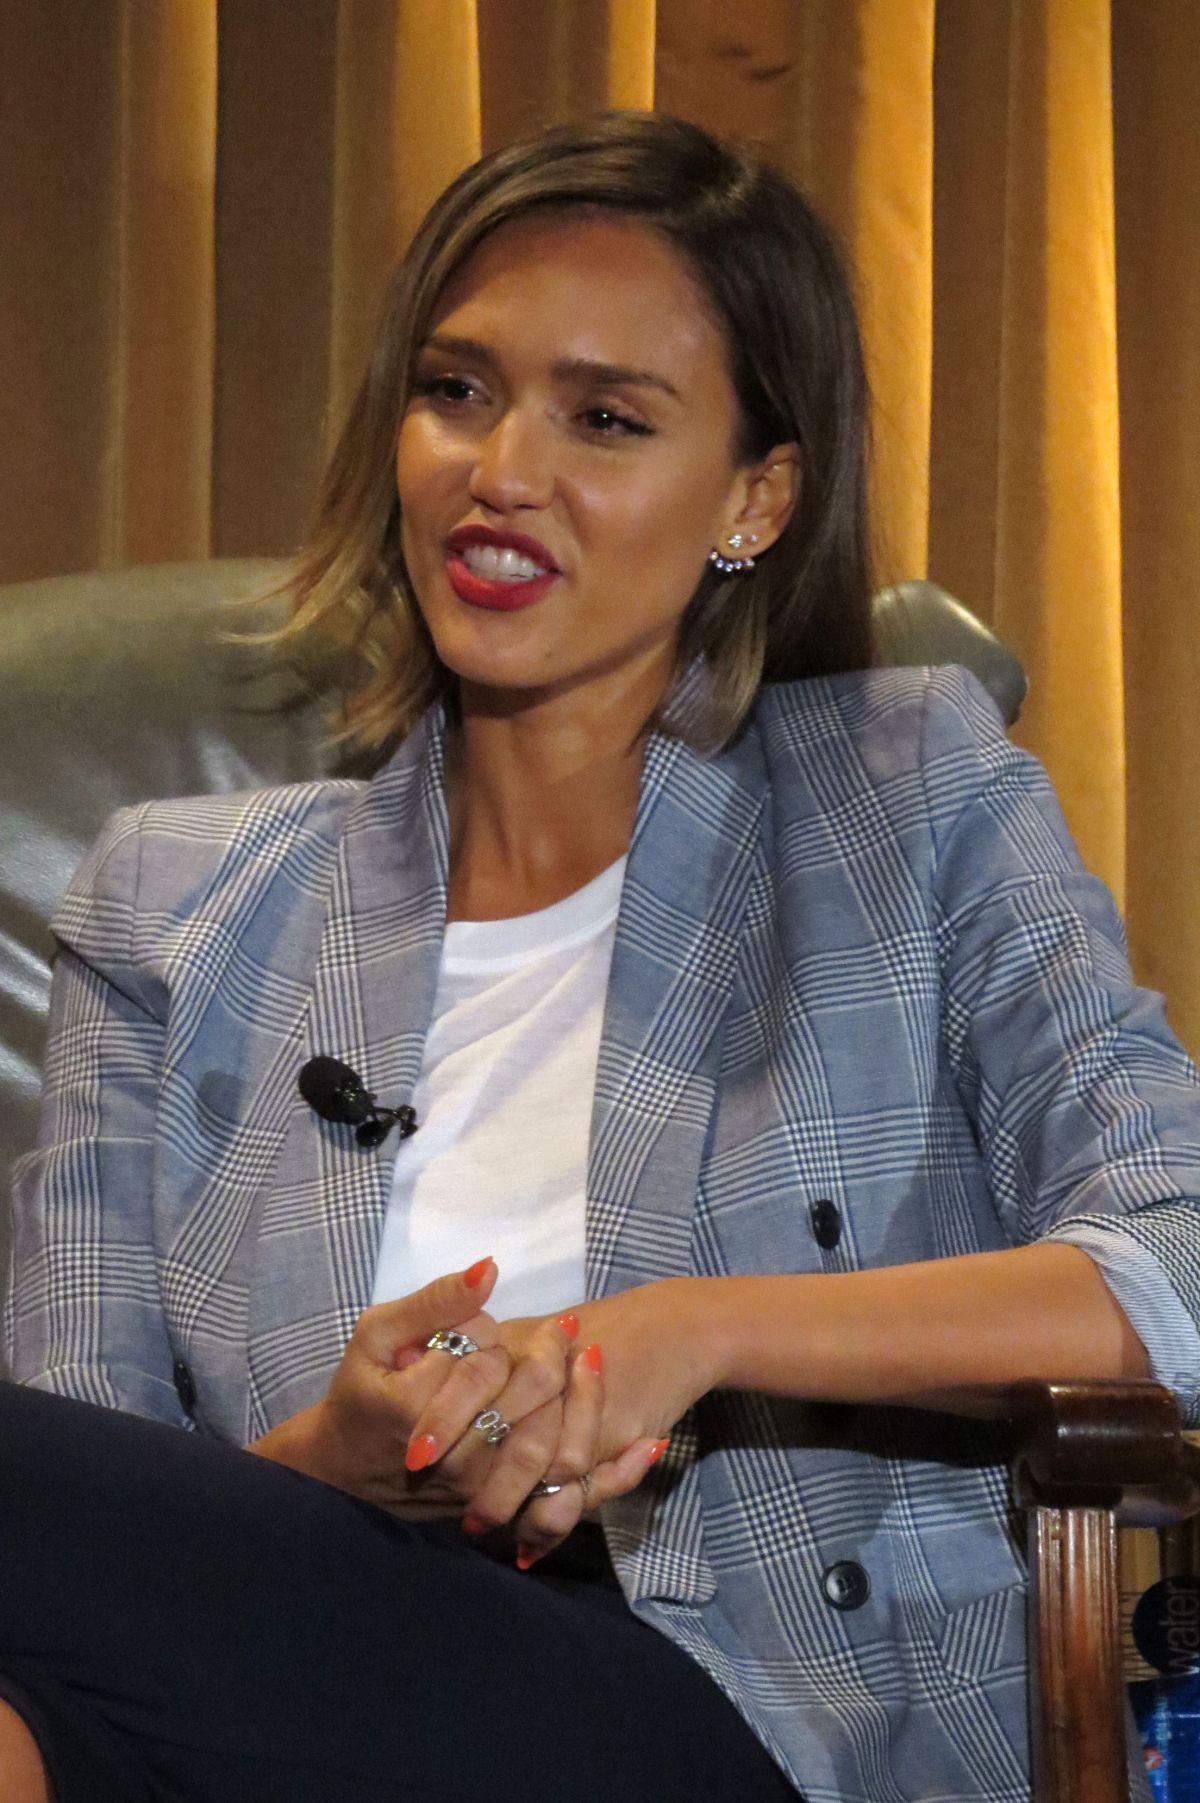 JESSICA ALBA at Honest Company Q&A in Beverly Hills – HawtCelebs